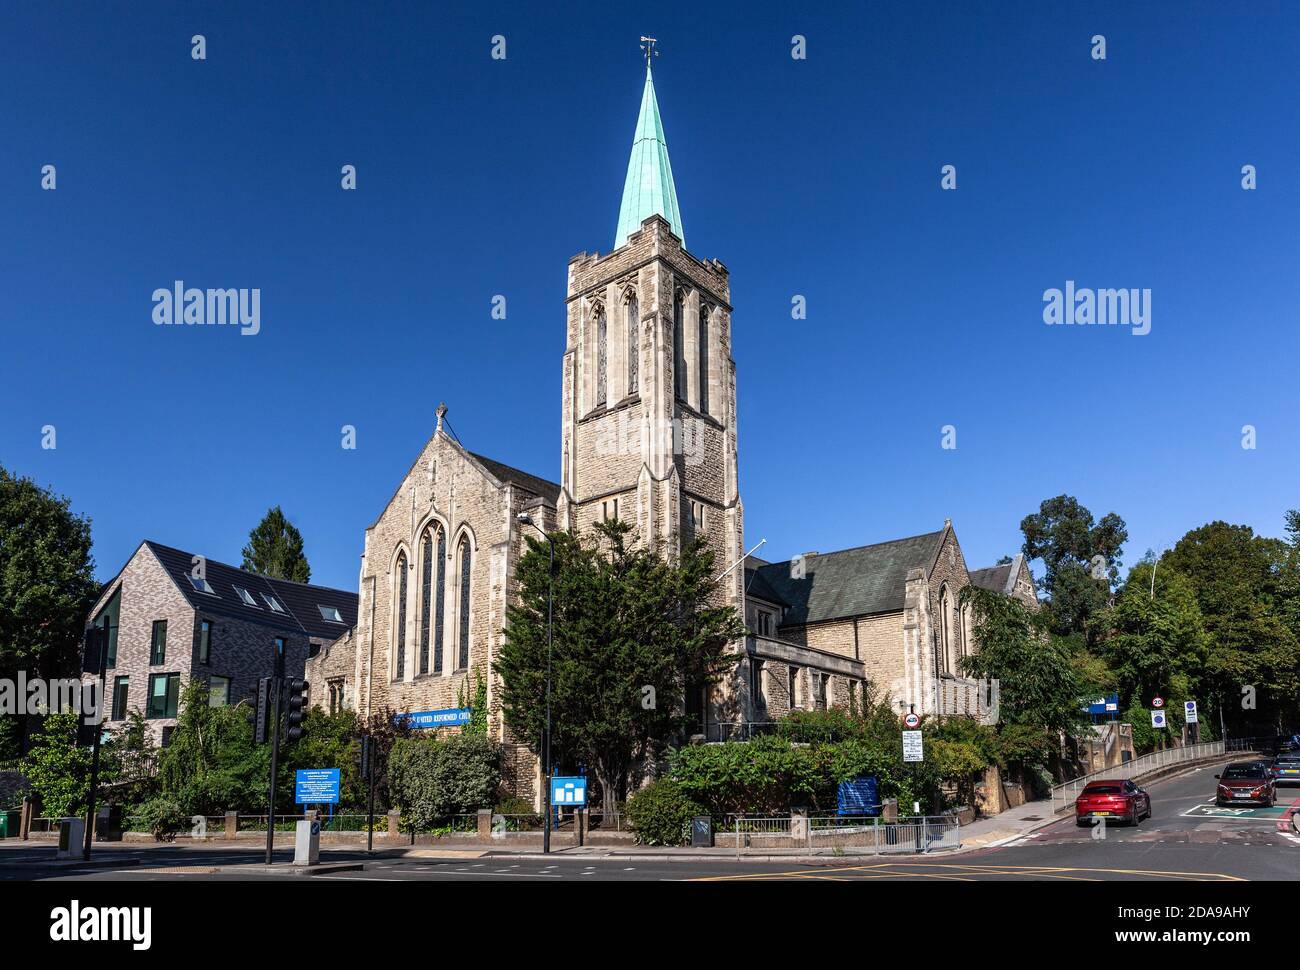 St. Andrew's United Reformed Church, Finchley Road, Londra NW3, Inghilterra, Regno Unito. Foto Stock